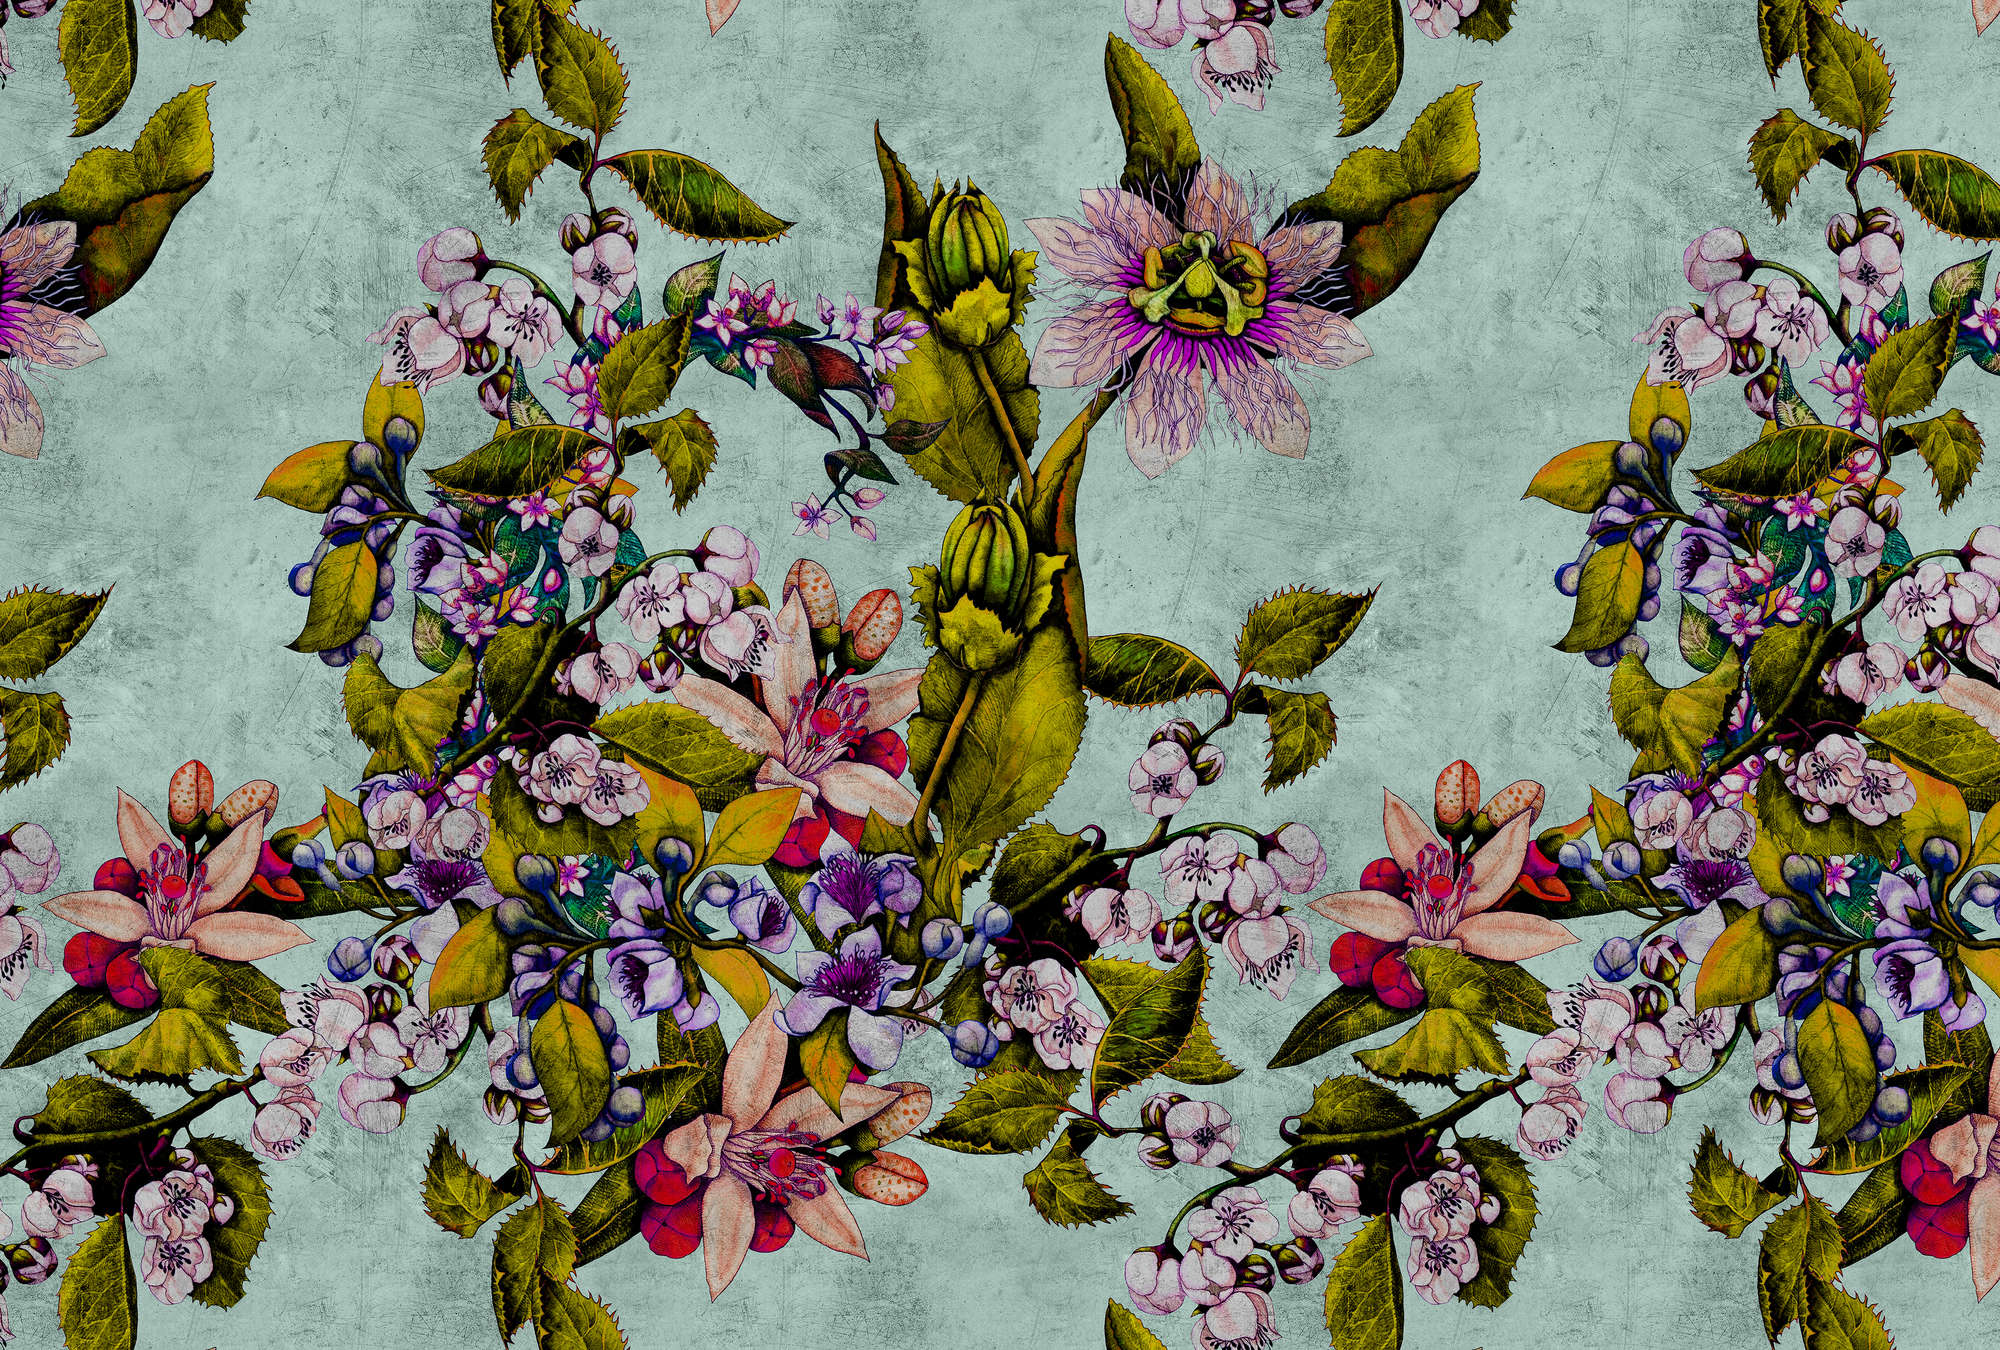             Tropical Passion 2 - Scratchy Textured Wallpaper with Blossoms and Buds - Green | Premium Smooth Non-woven
        